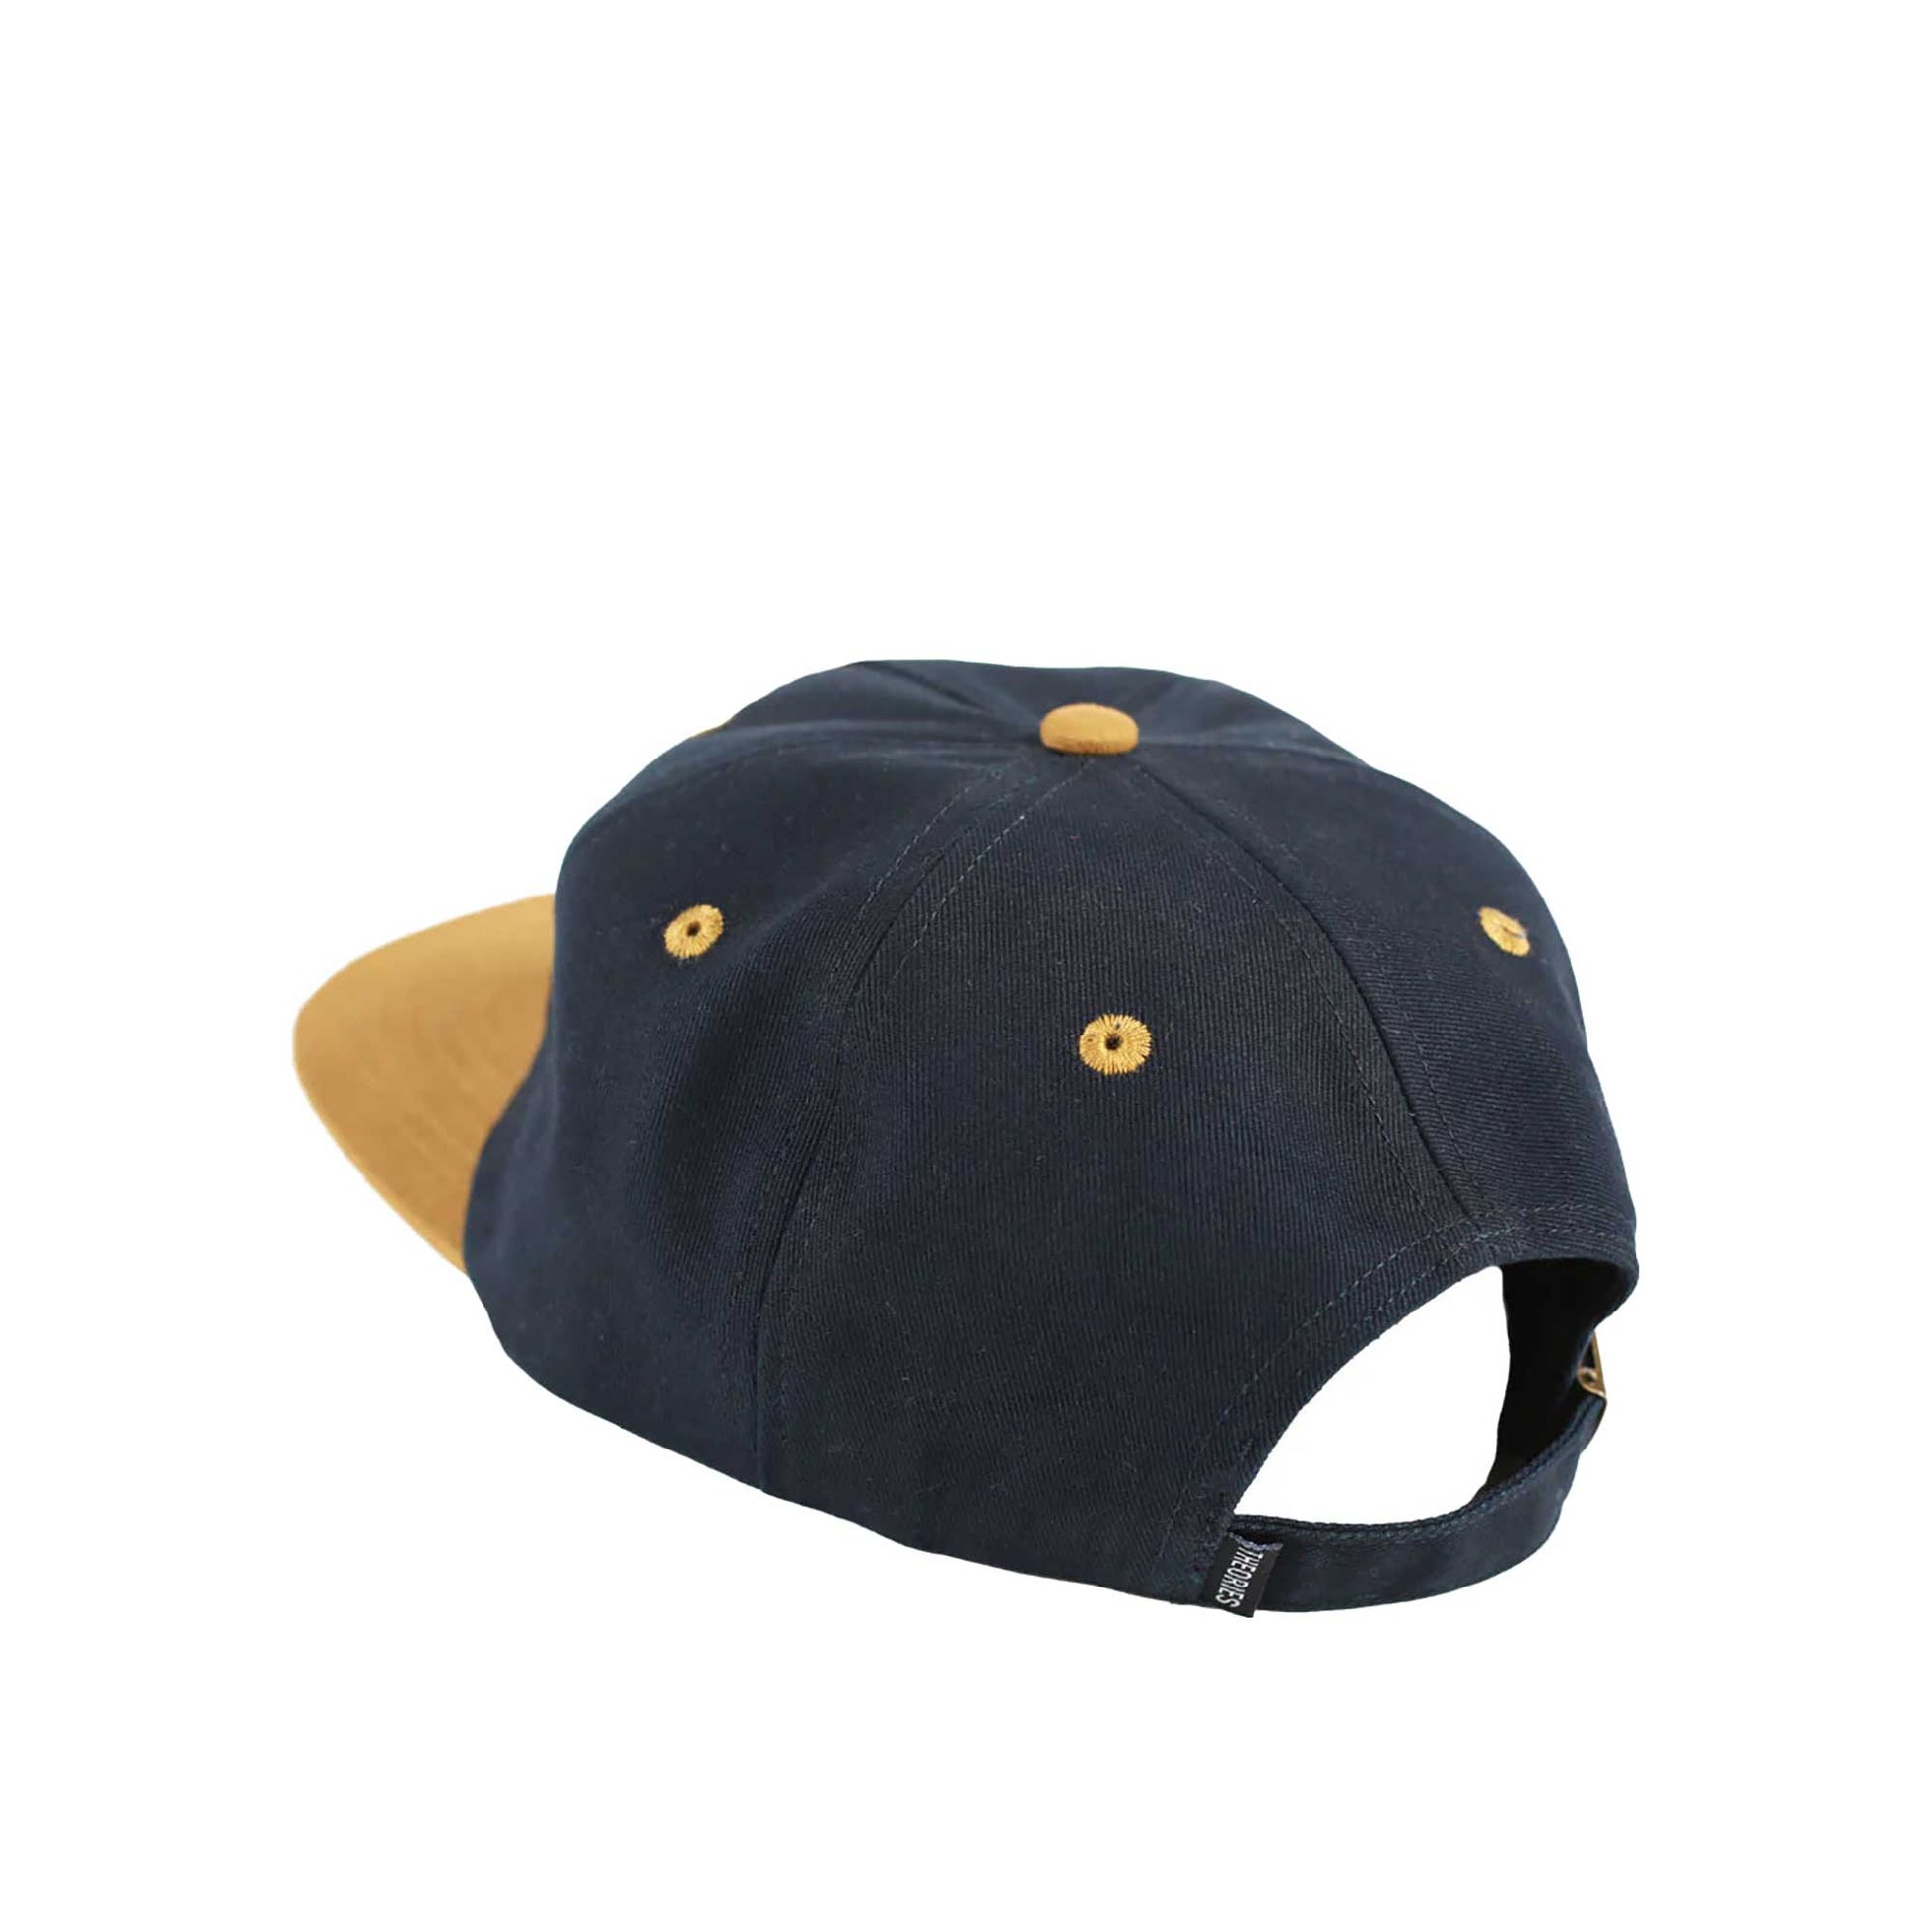 Theories Hand Of Theories Strapback, navy/gold - Tiki Room Skateboards - 2